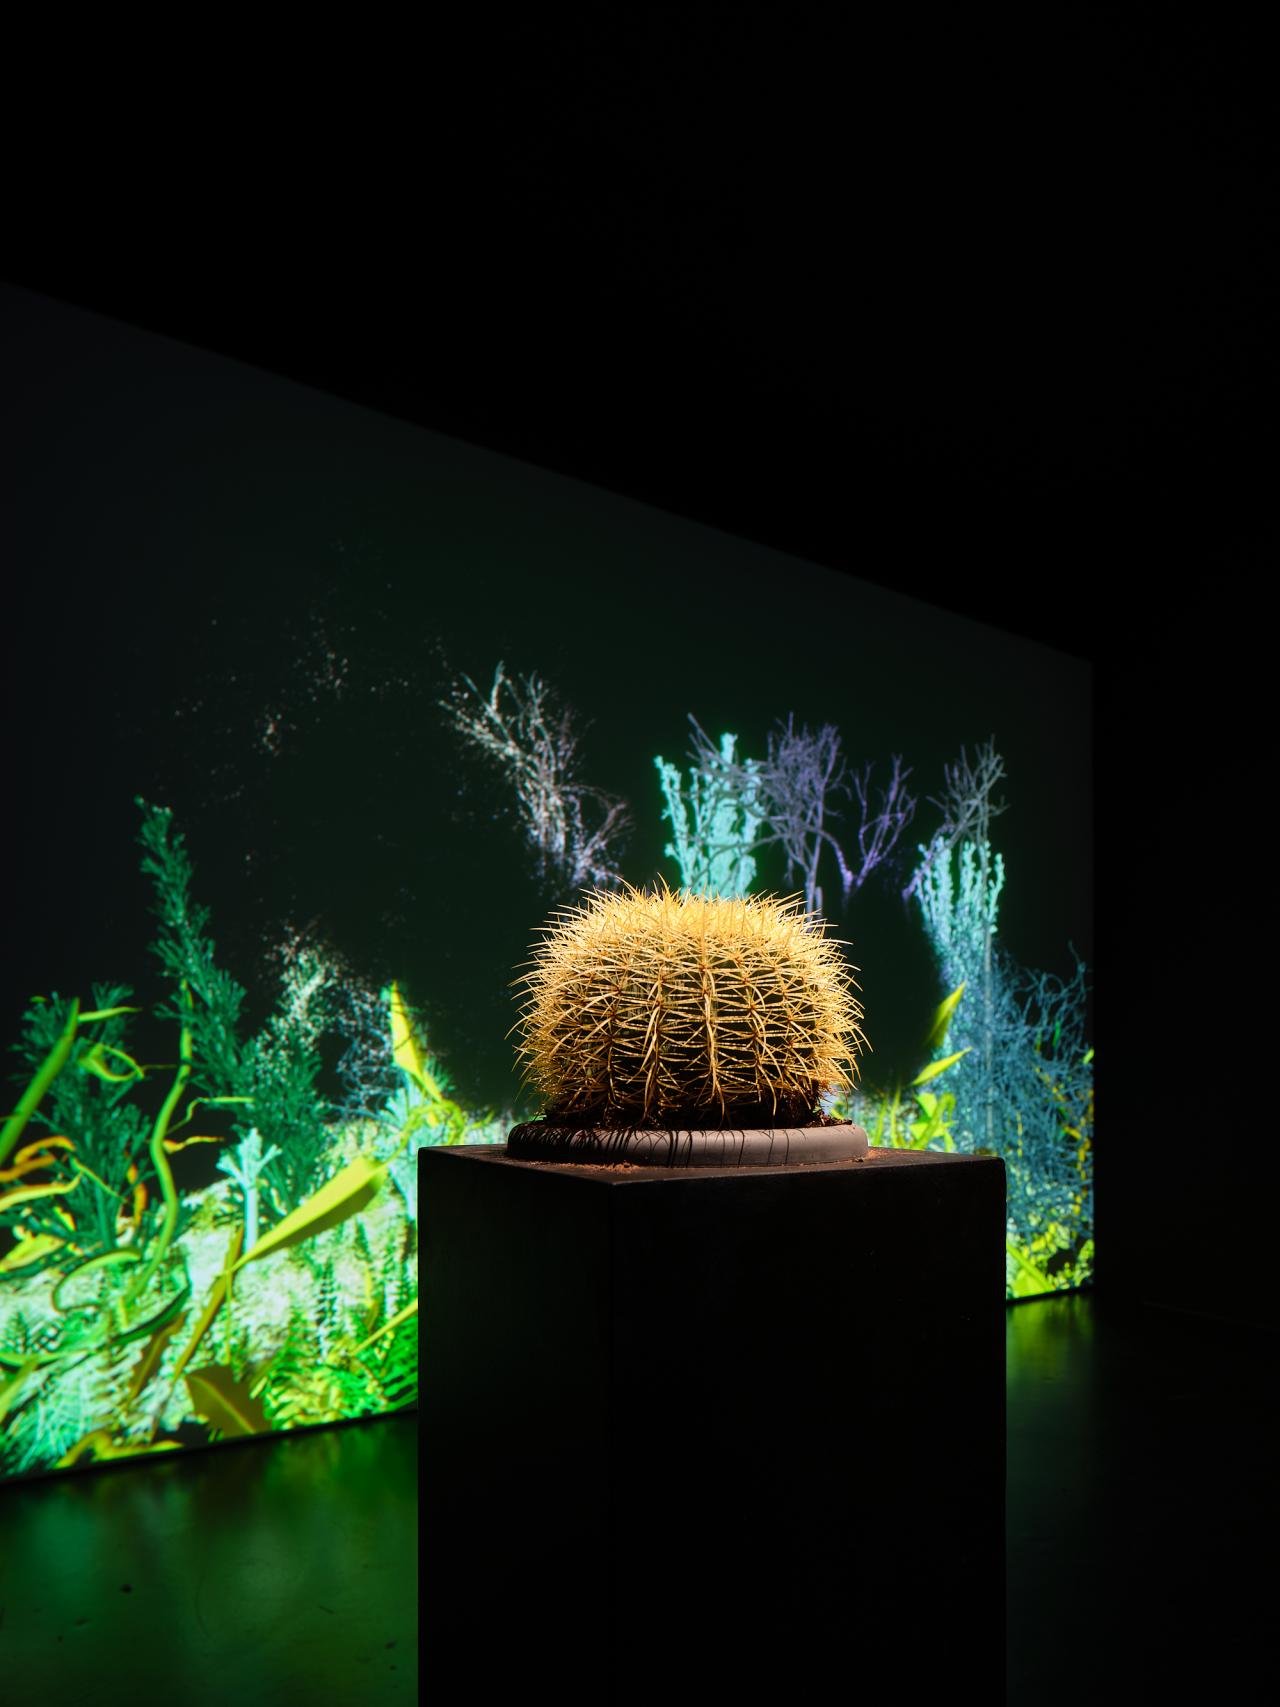 On display is the work "Interactive Plant Growing". A detailed view shows a close-up of one of the plants. This is a cactus.